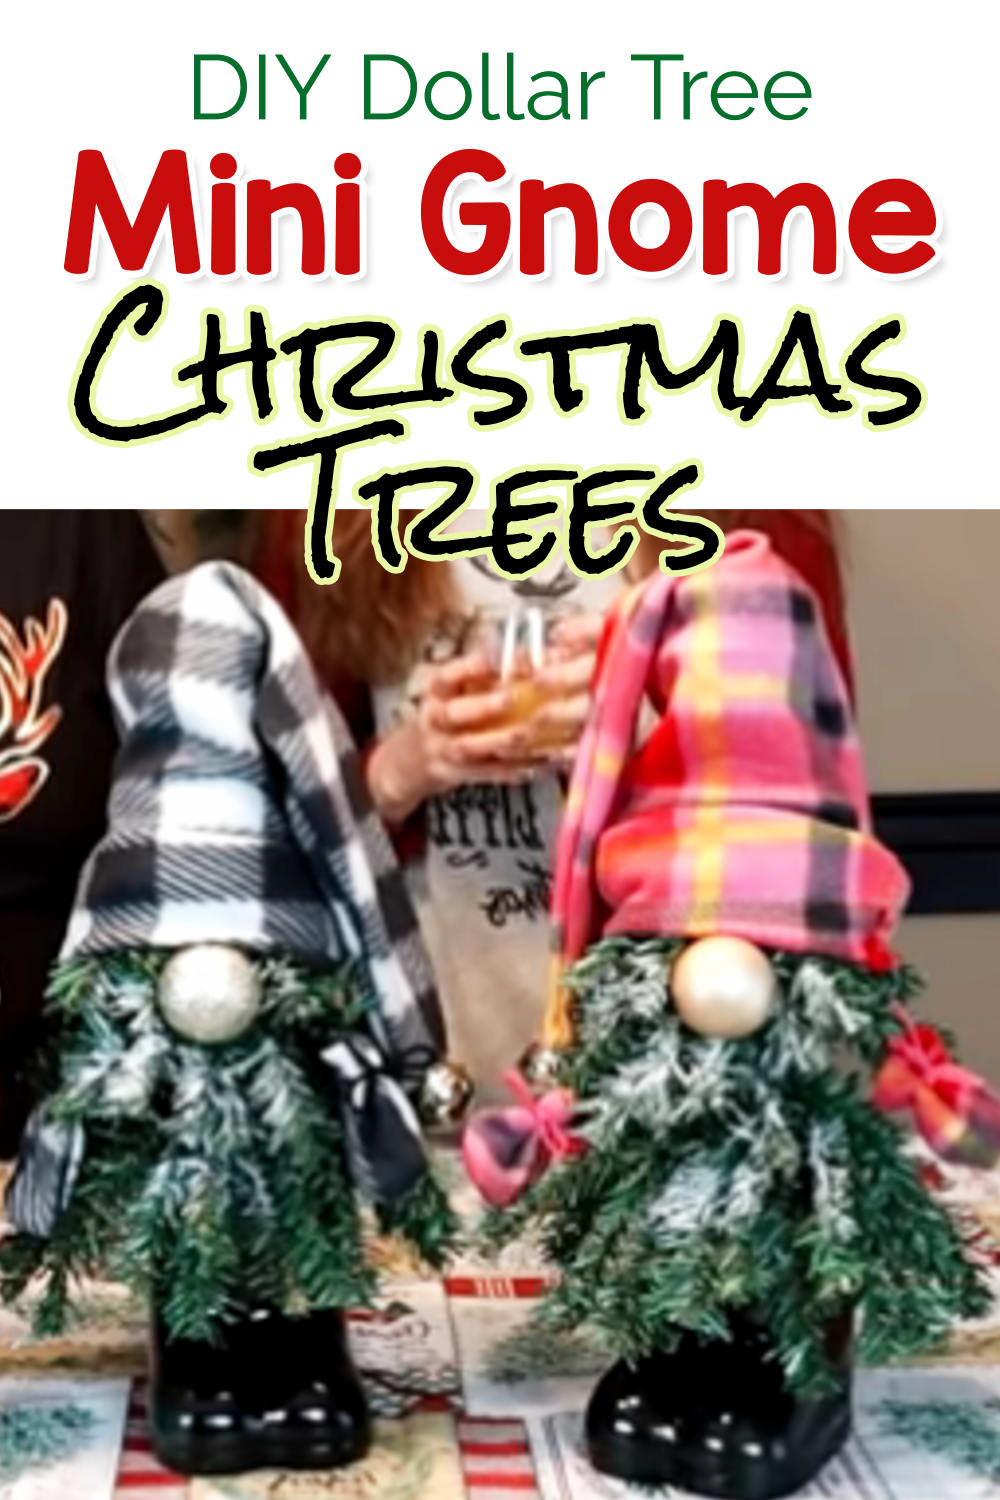 Gnome Trees - DIY Dollar Tree Christmas Gnome Trees with artificial pine branches - how to make dollar tree Holiday gnomes